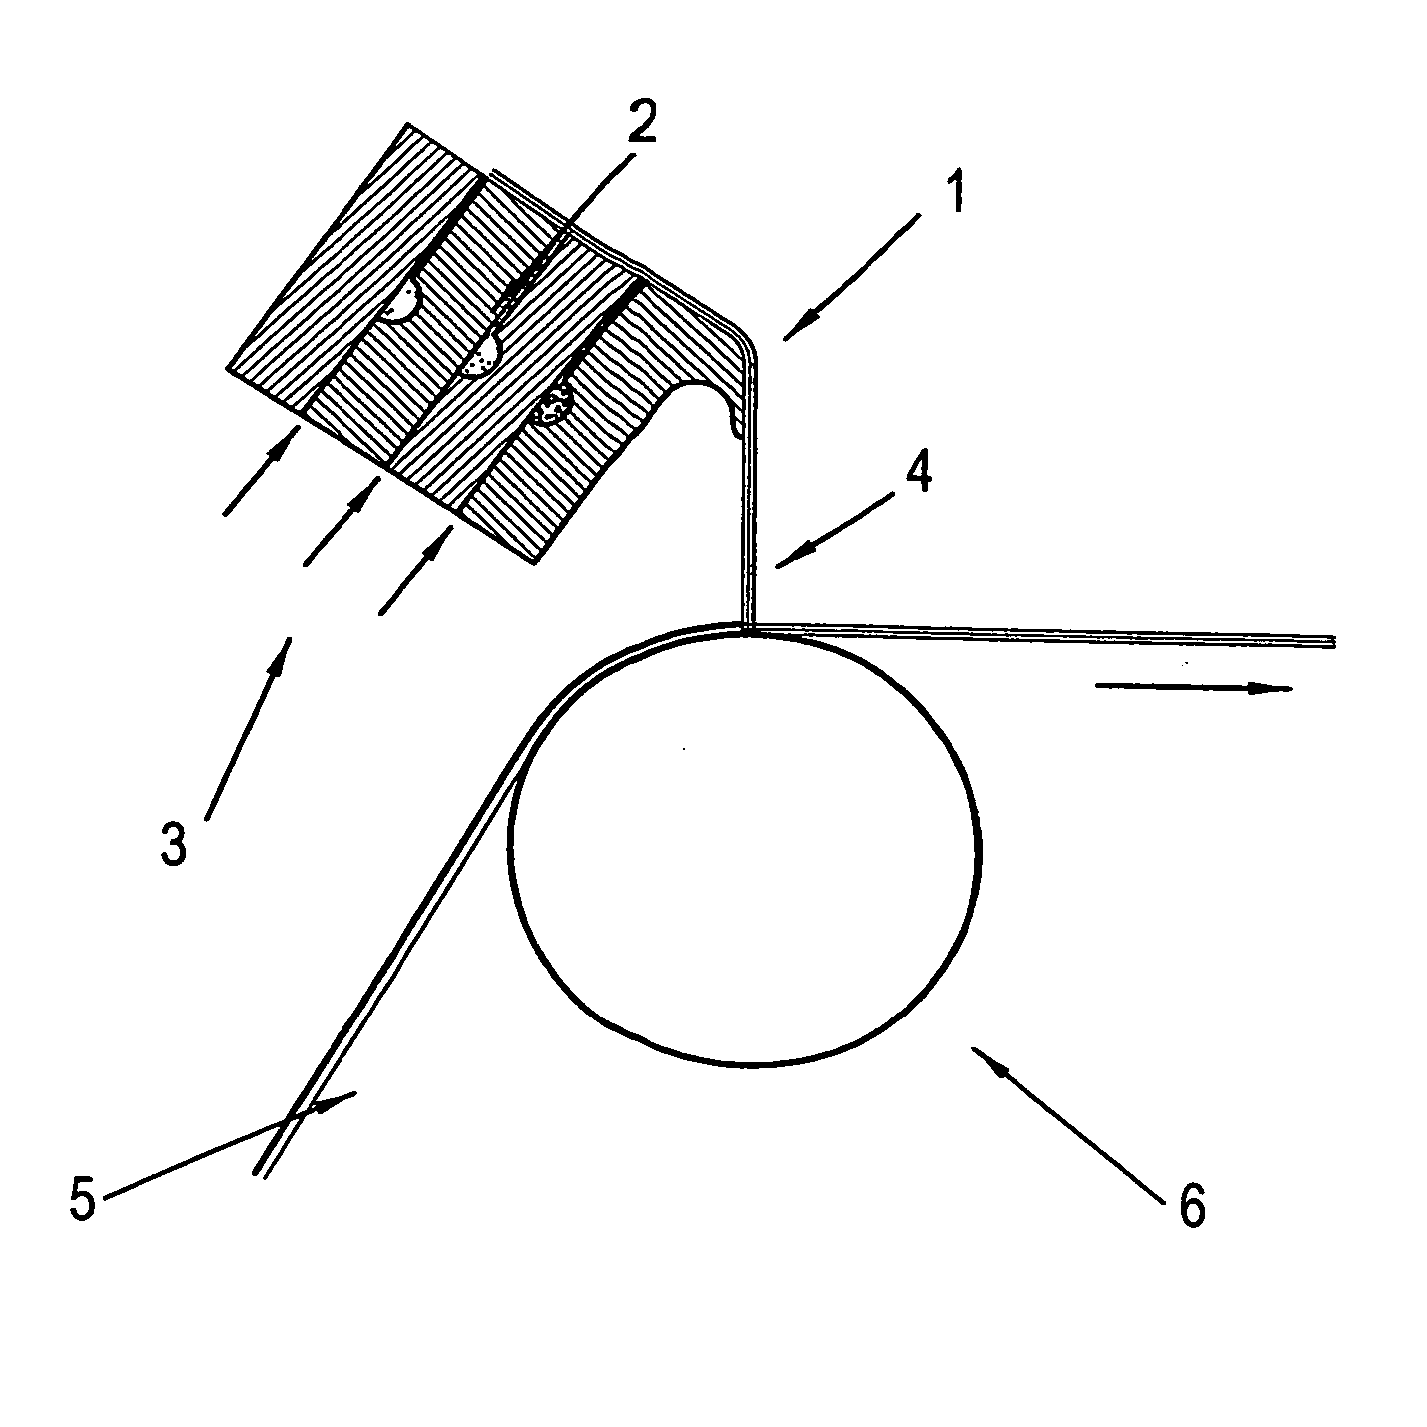 Process for making coated paper or paperboard